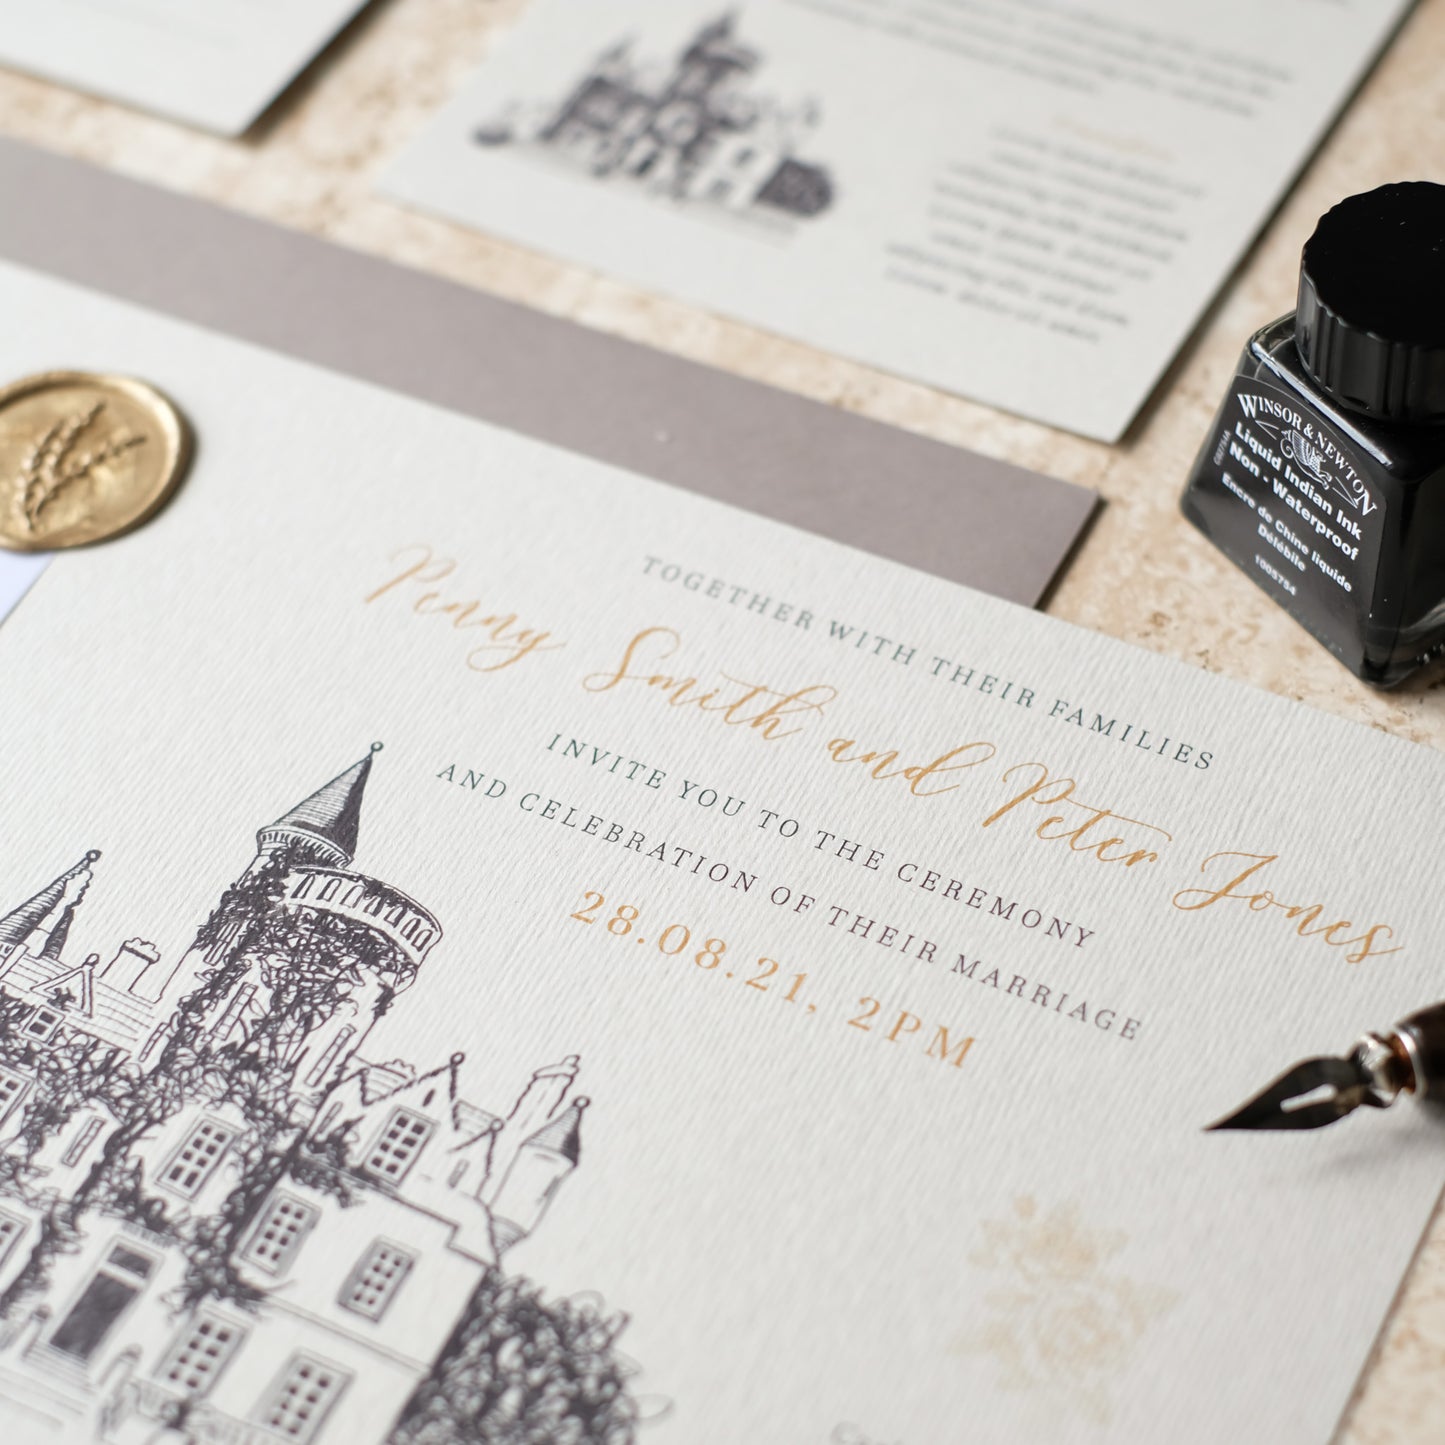 Invitation With Gold Wax Seal And Venue lllustration